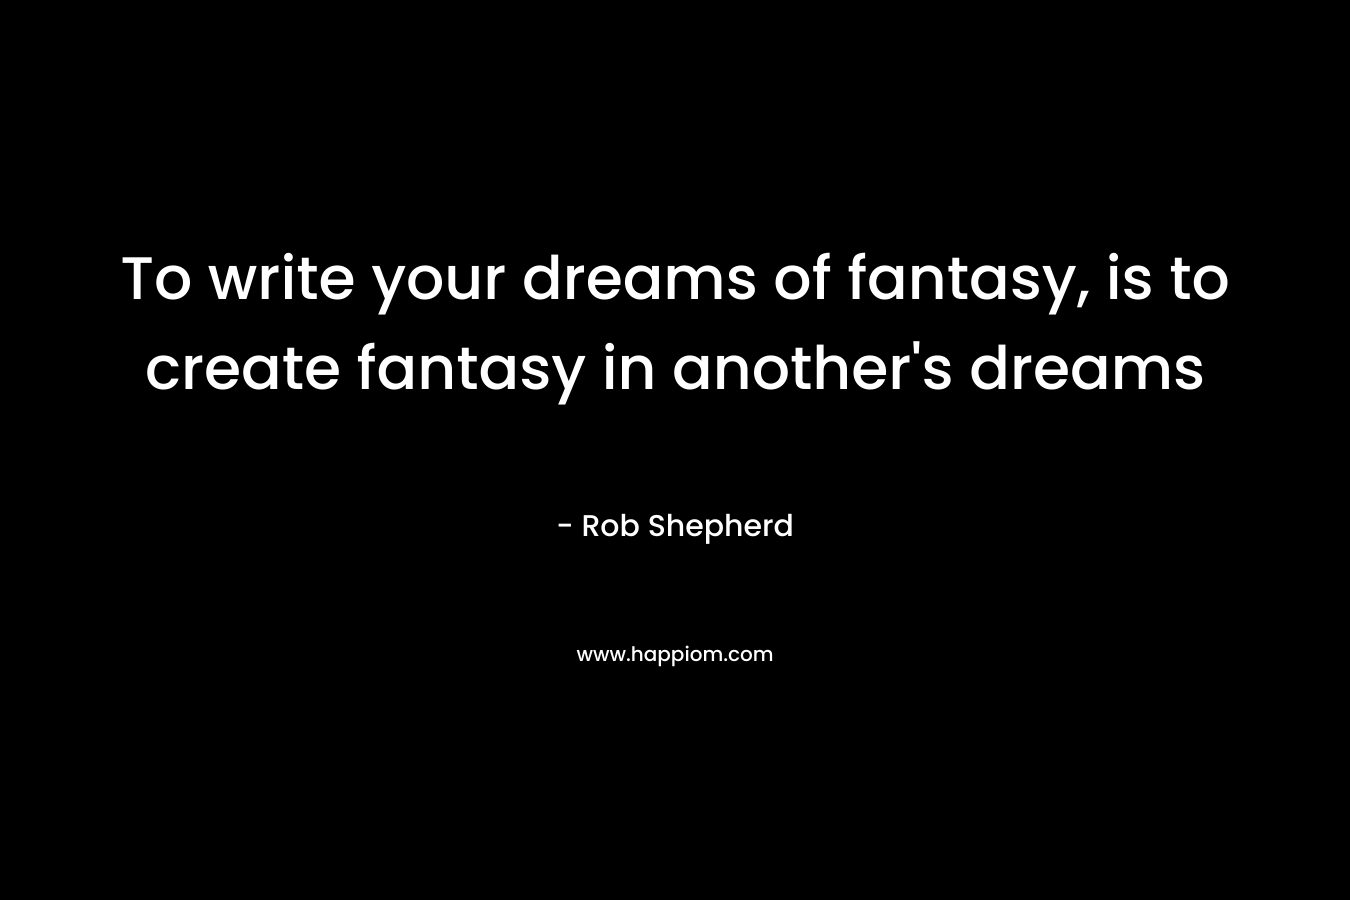 To write your dreams of fantasy, is to create fantasy in another's dreams